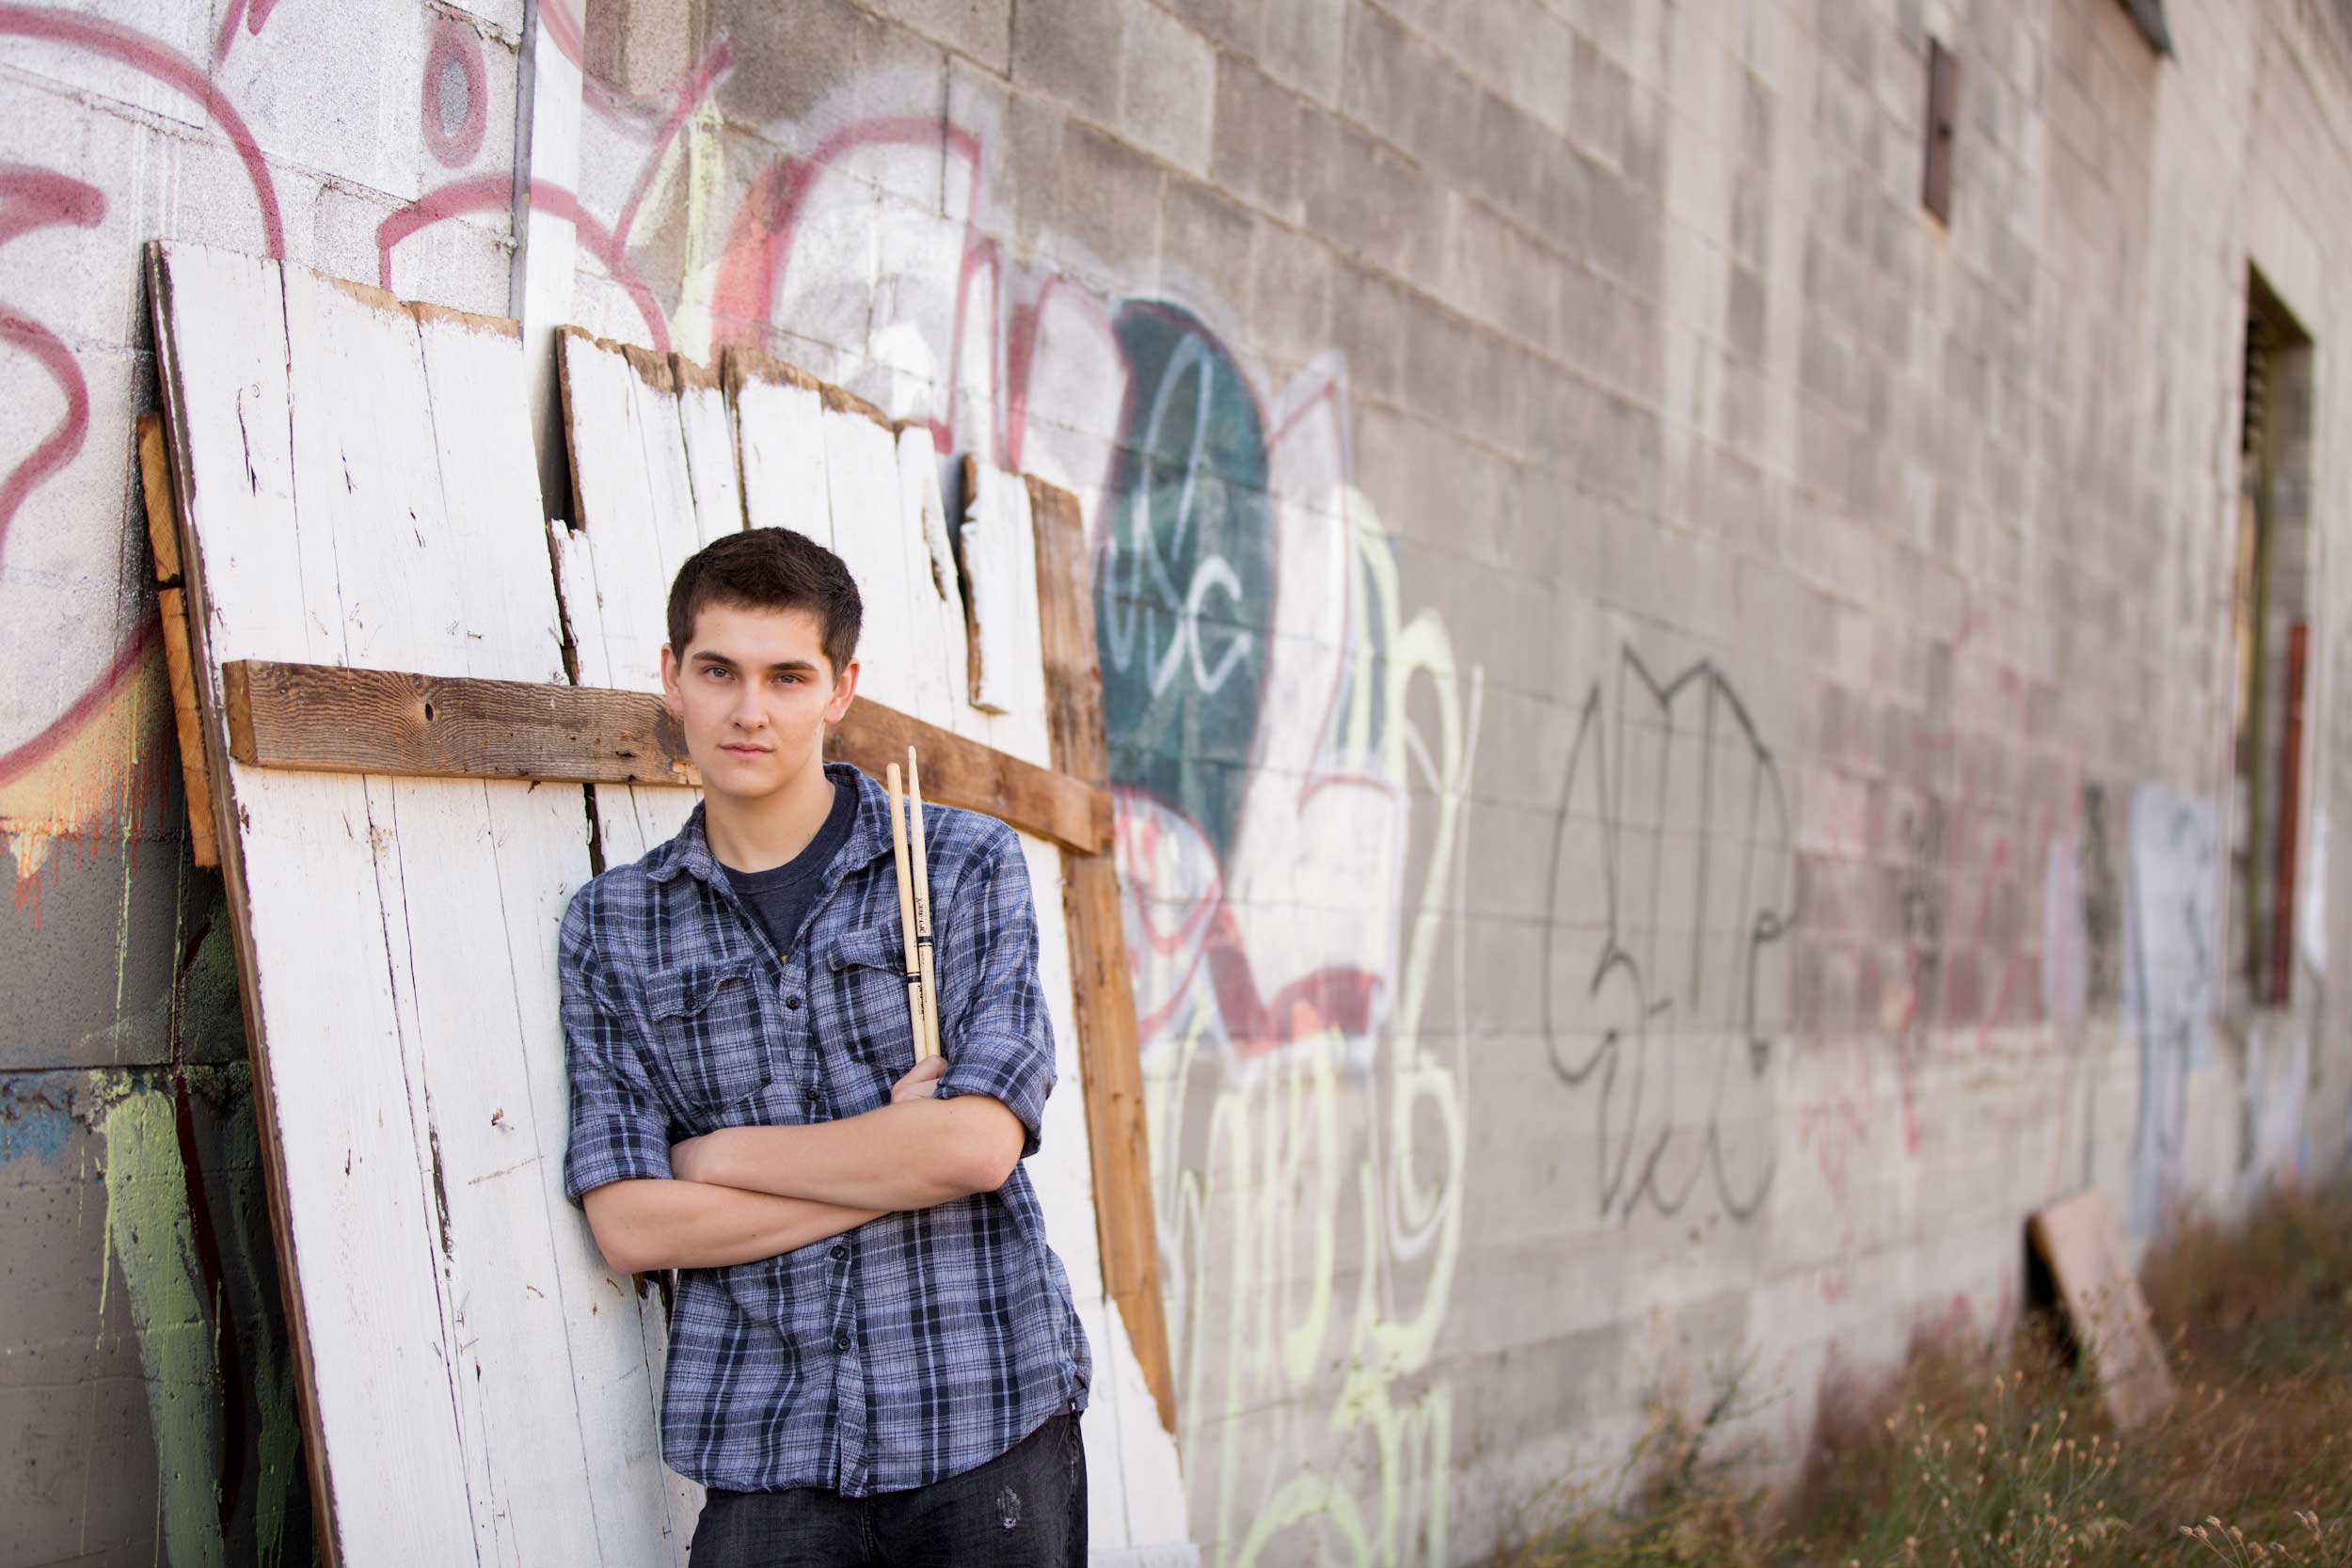 A Pallet, Graffiti and a high school senior with his sticks